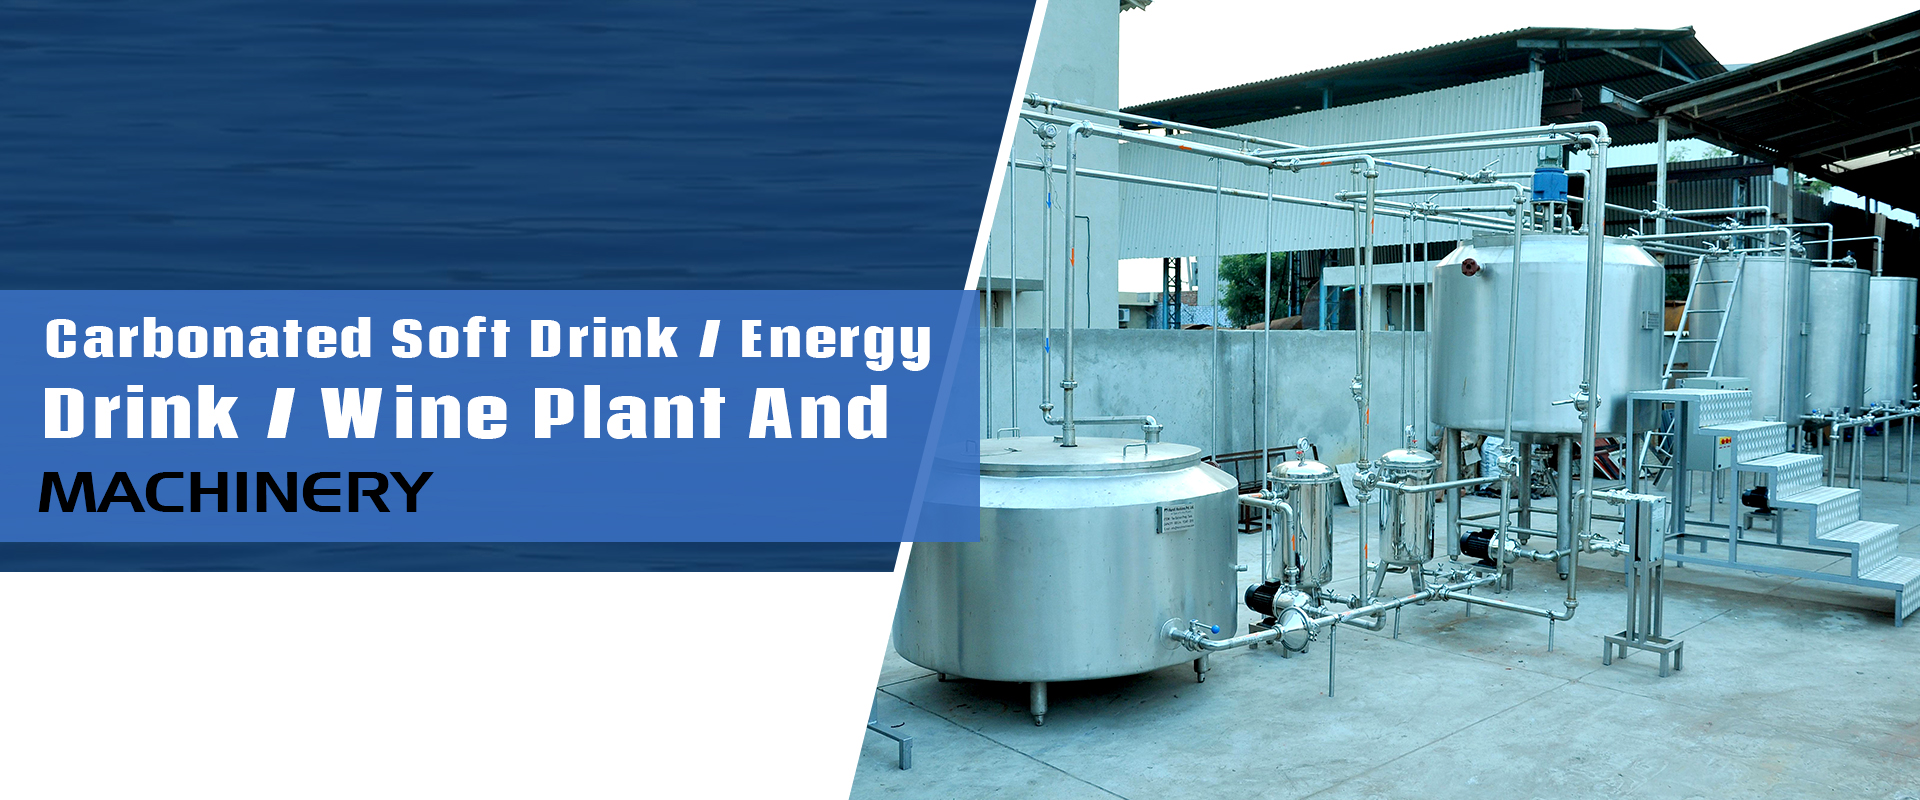 Carbonated Soft Drink / Energy Drink / Wine Plant And Machinery